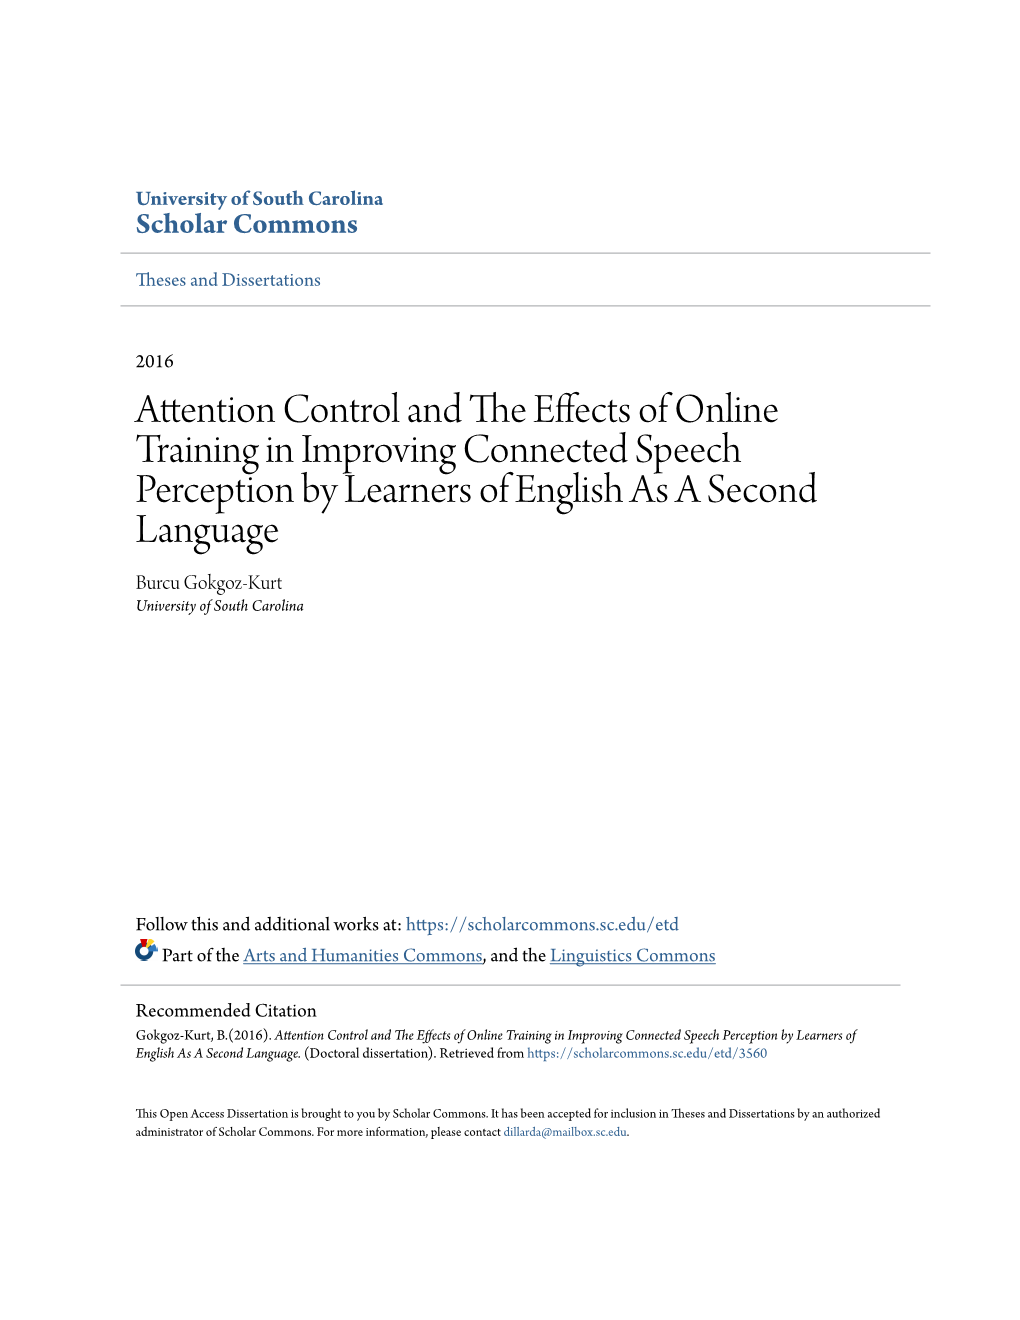 Attention Control and the Effects of Online Training in Improving Connected Speech Perception by Learners of English As a Second Language